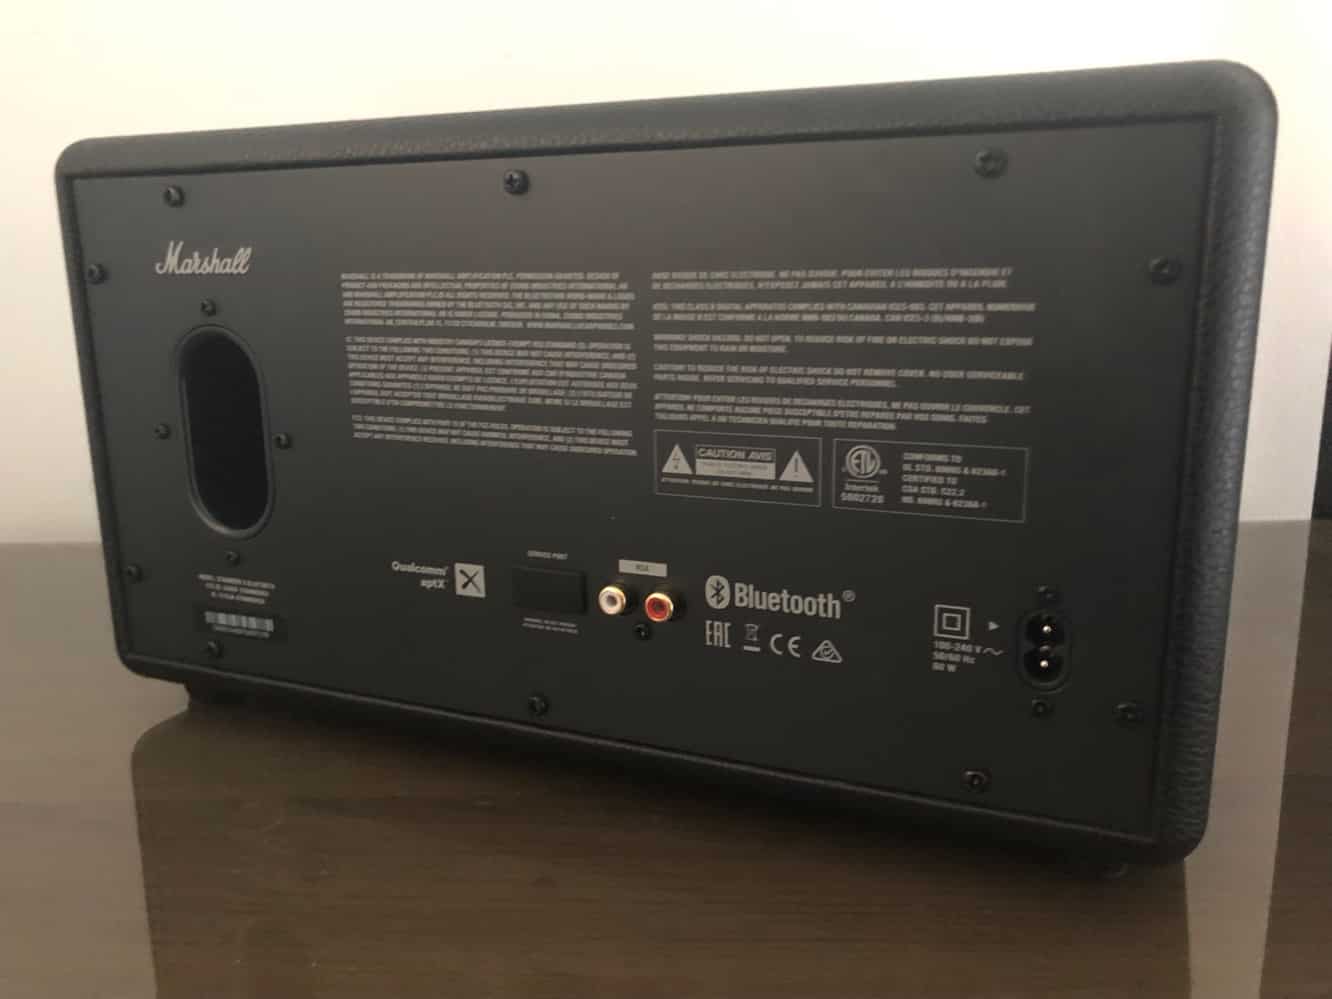 Recensione: Altoparlante Bluetooth Marshall Stanmore II